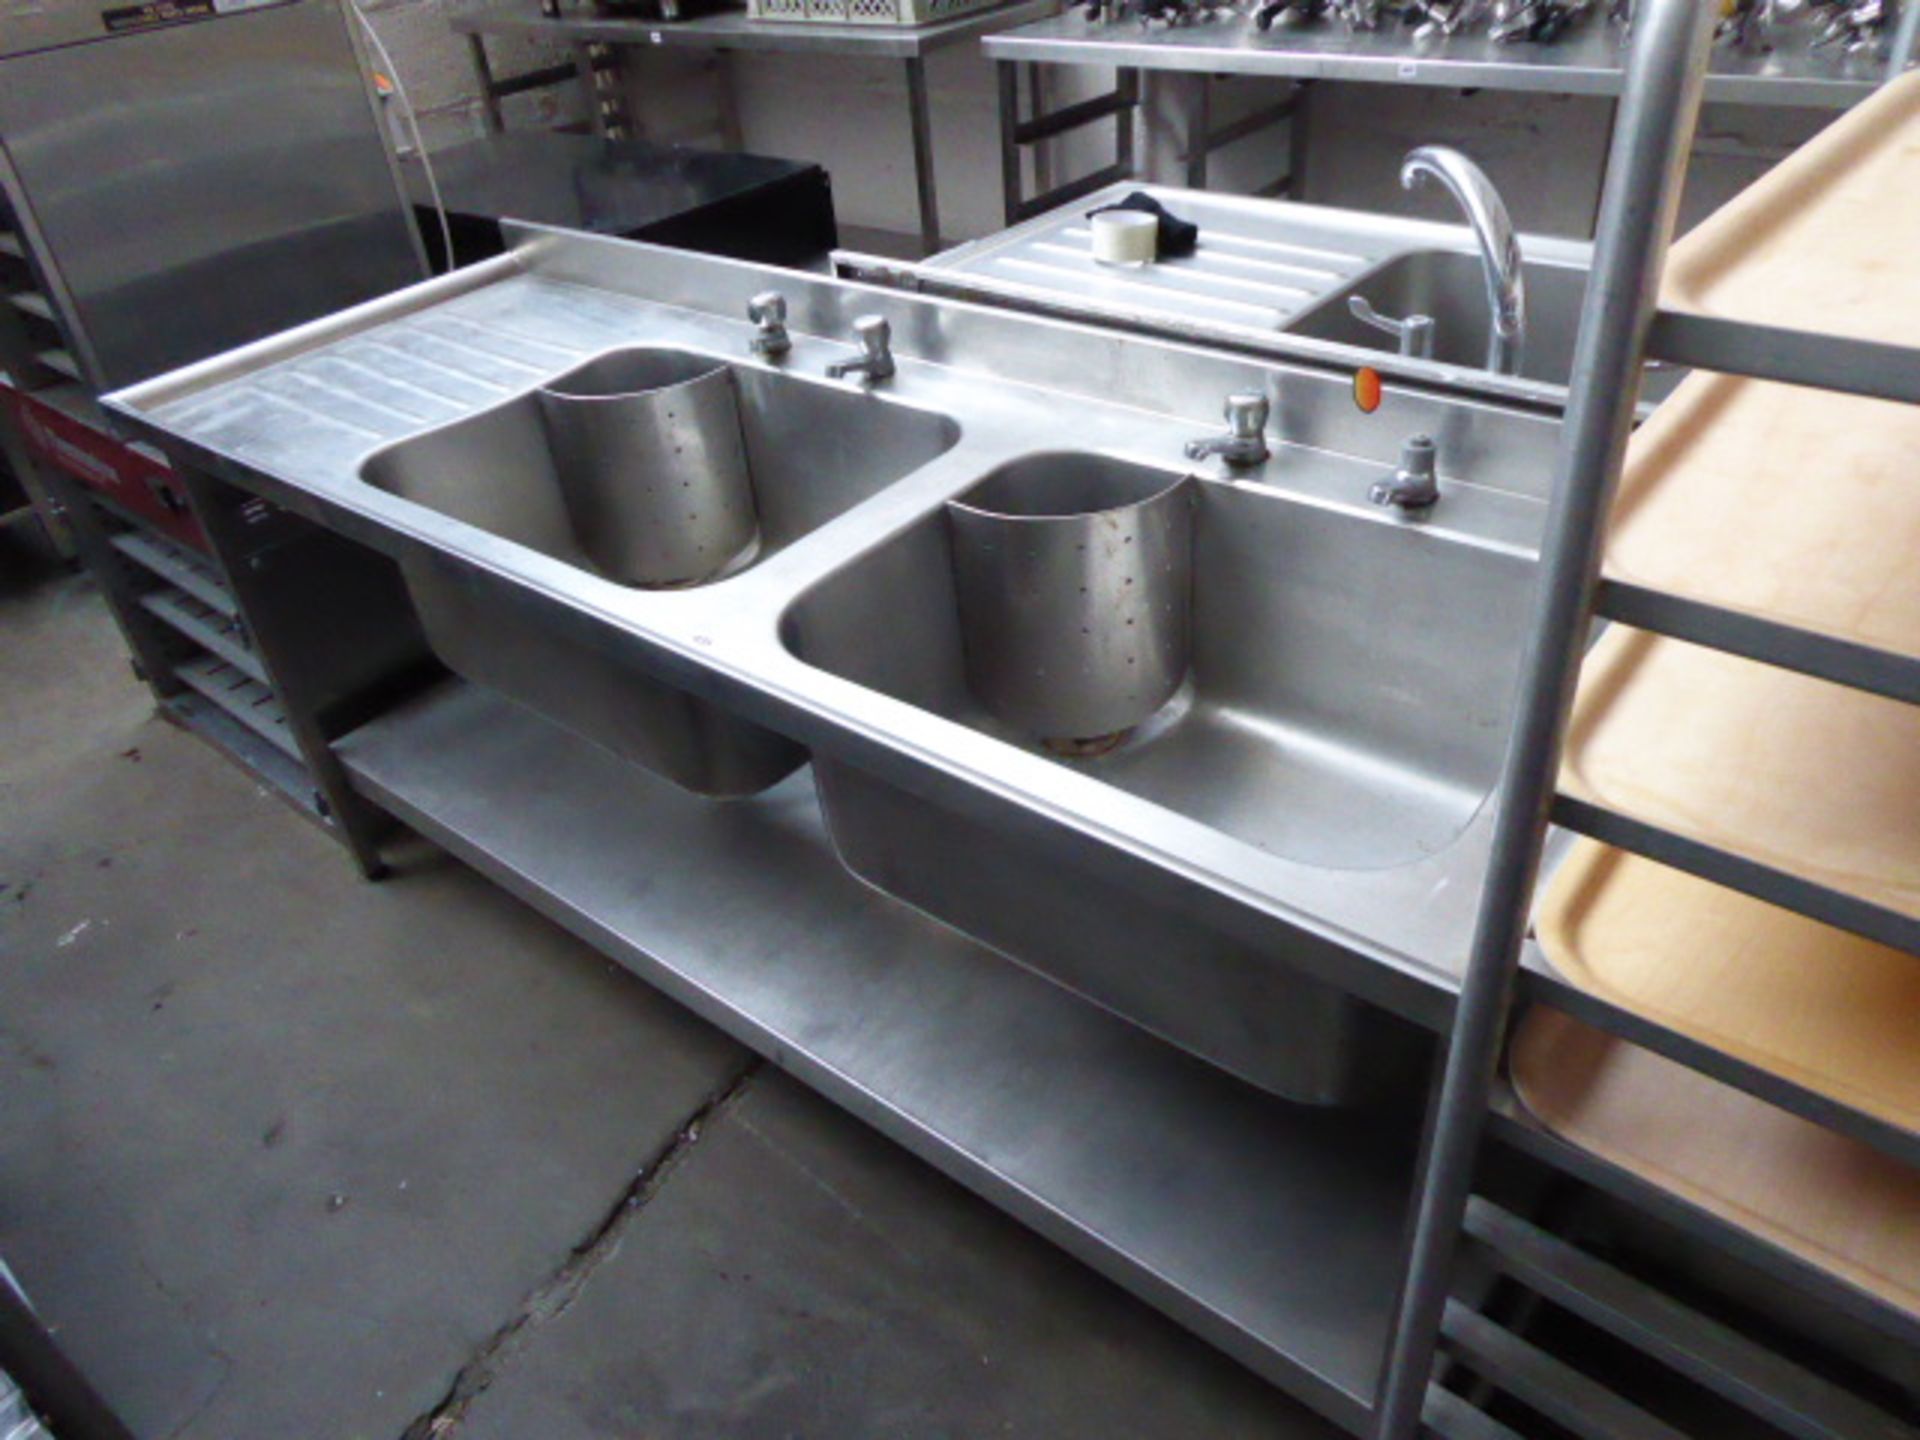 175cm stainless steel double bowl sink with draining board, tap sets and draining board under